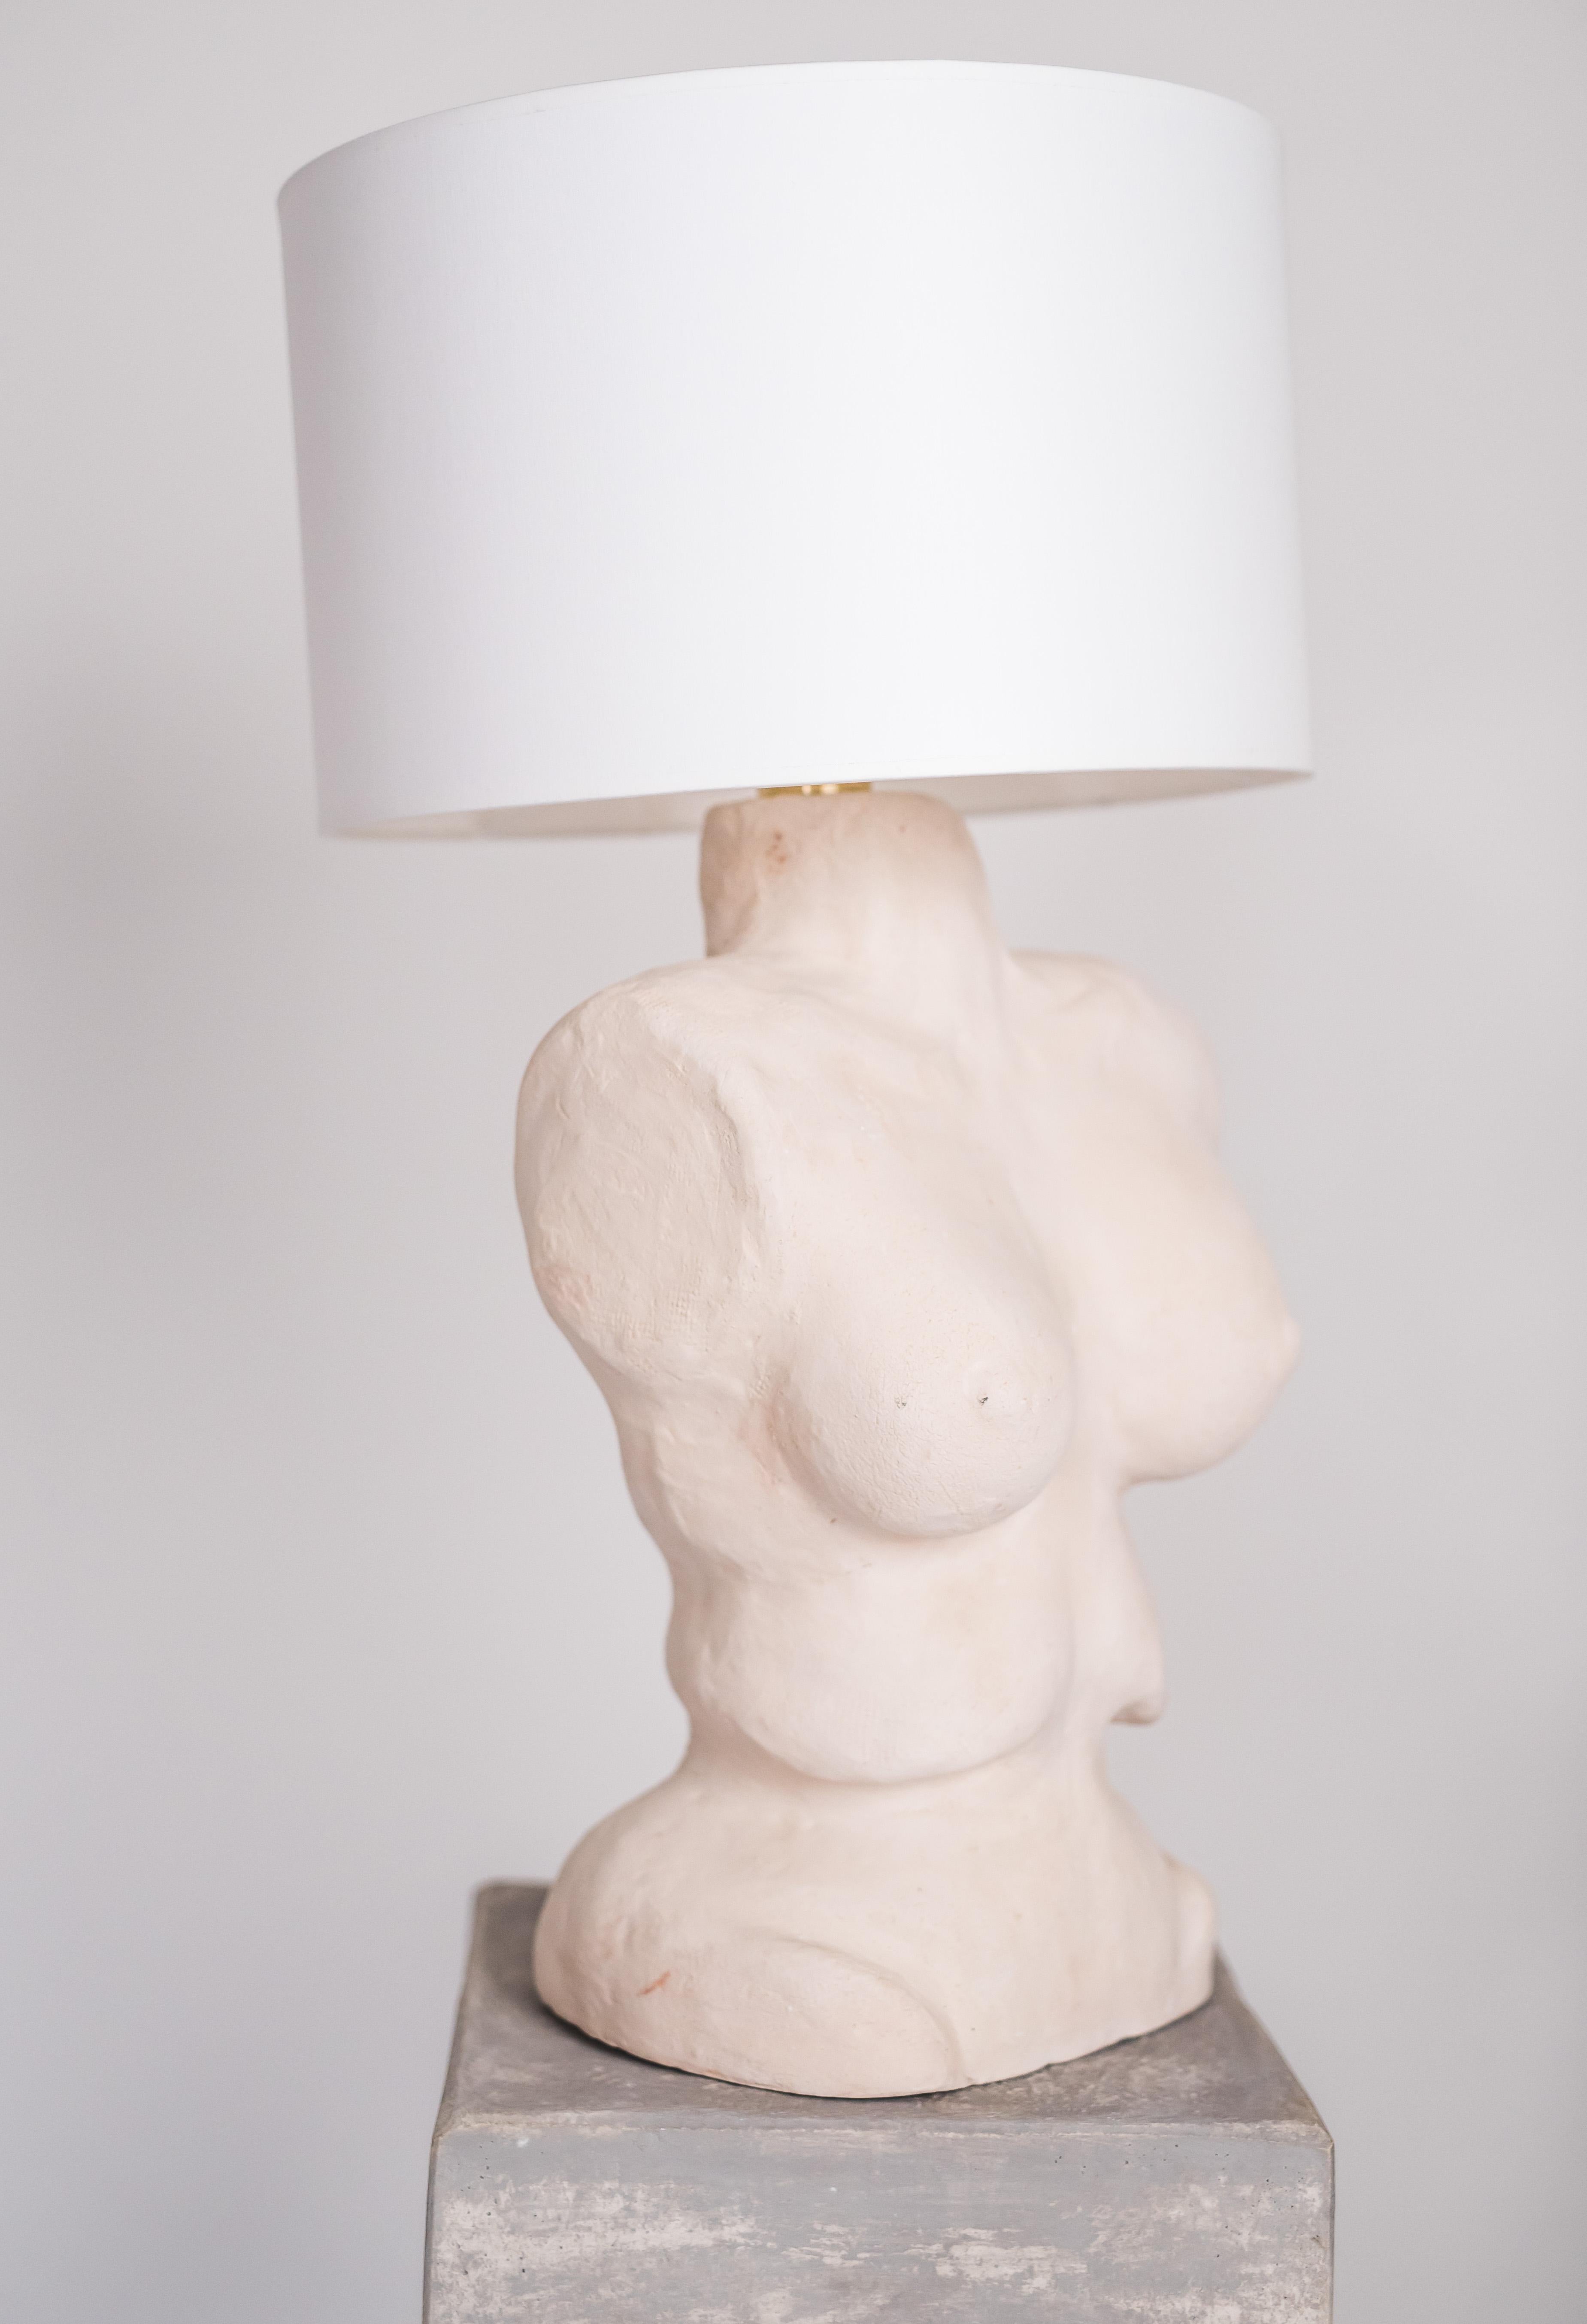 Female Torso sculpture by Brajak Vitberg
10 Pieces
Dimensions: Ø 35 x H 65 cm
Materials: white or black cotton lampshade, cotton wiring

Bijelic and Brajak are two architects from Ljubljana, Slovenia.
They are striving to design craft elements